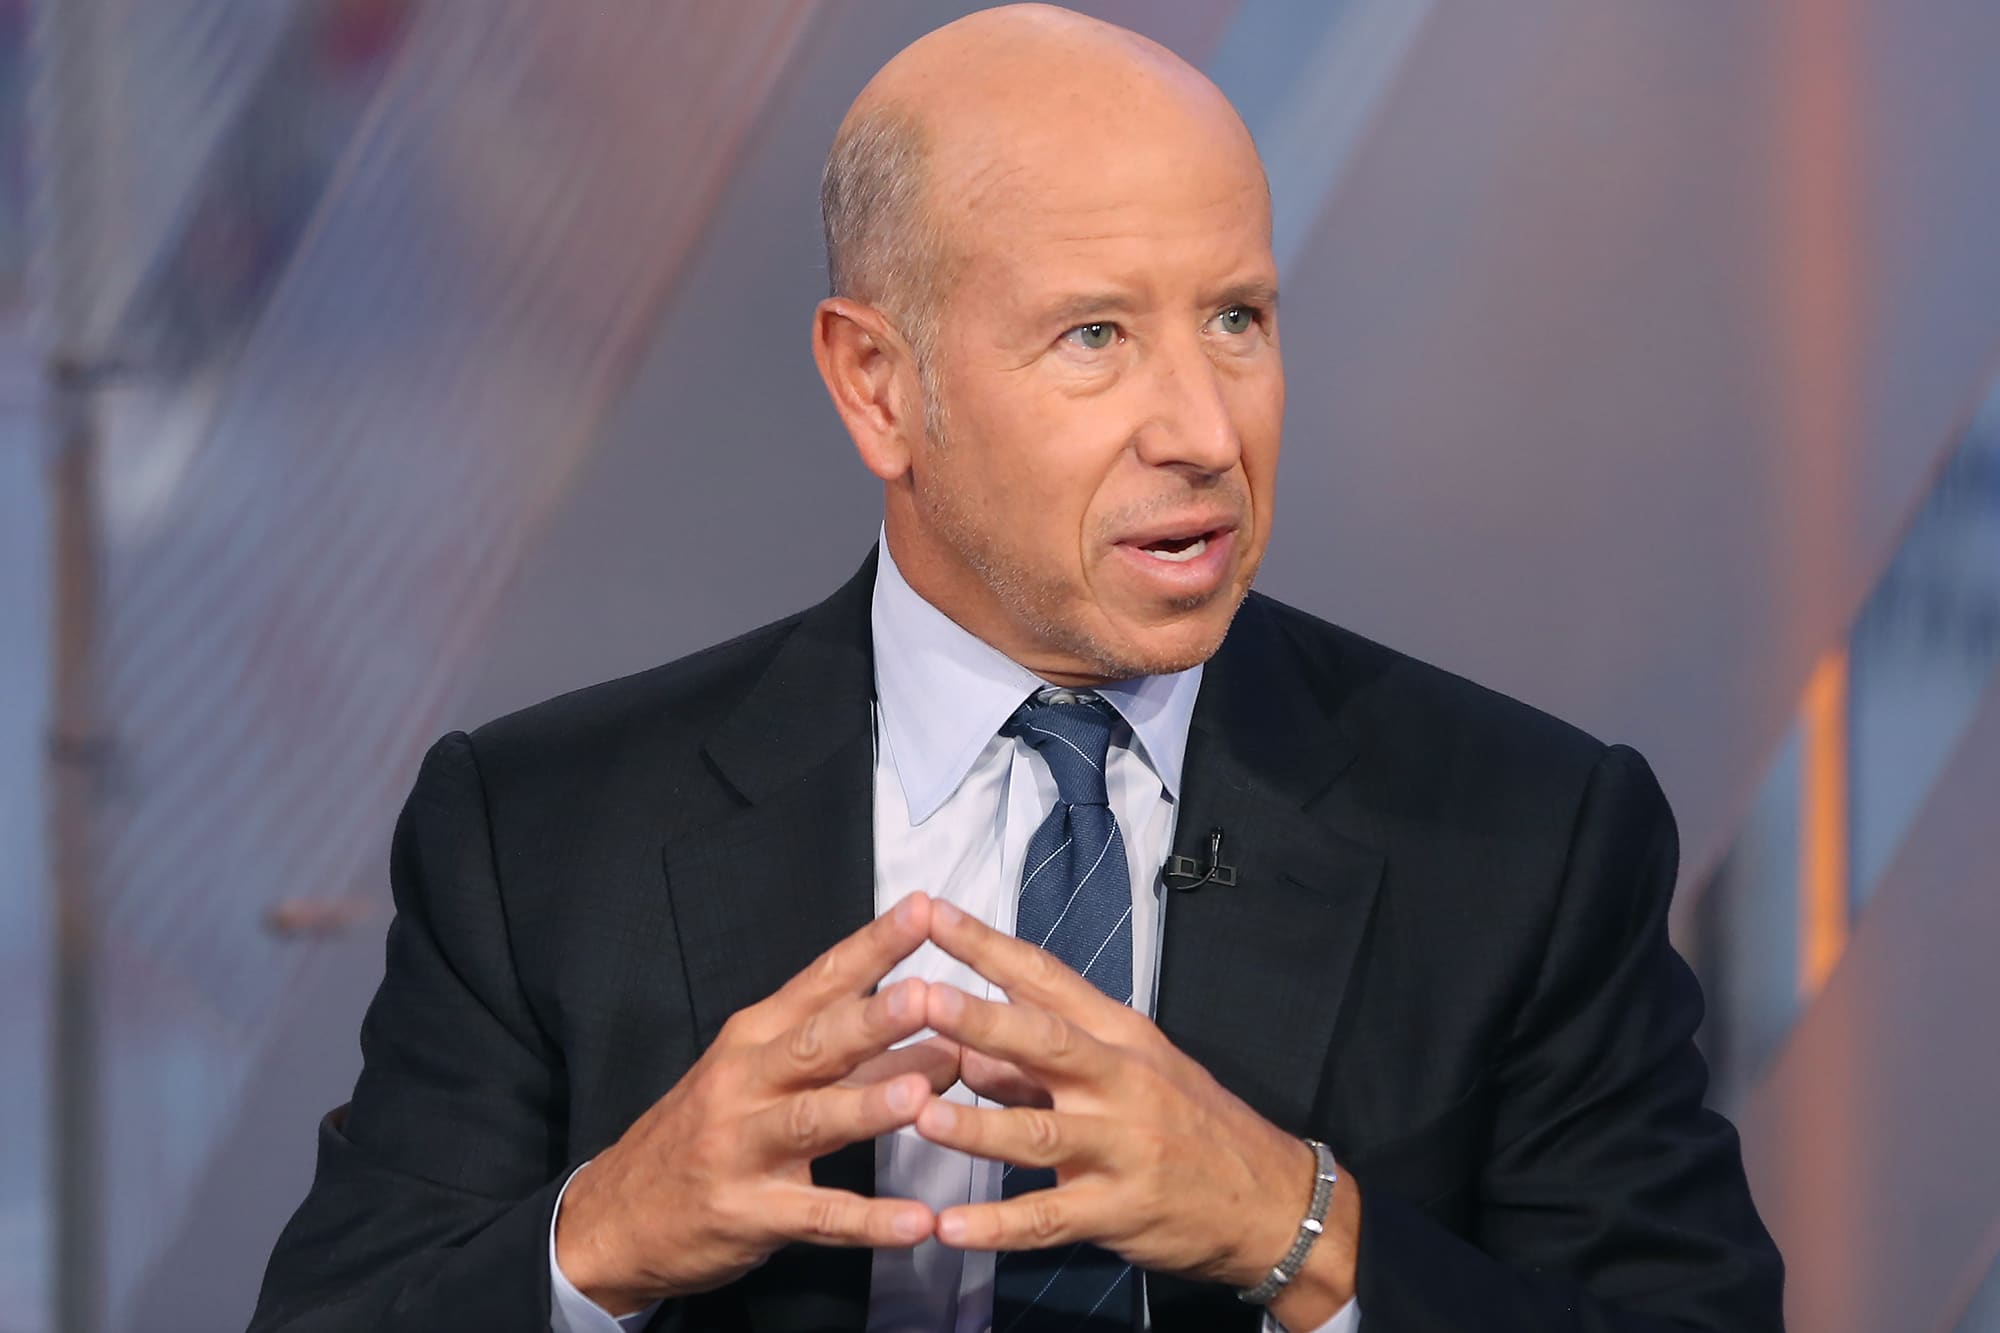 Barry Sternlicht hopes that ‘the public will not be taken to the massacre’ in bad SPACs